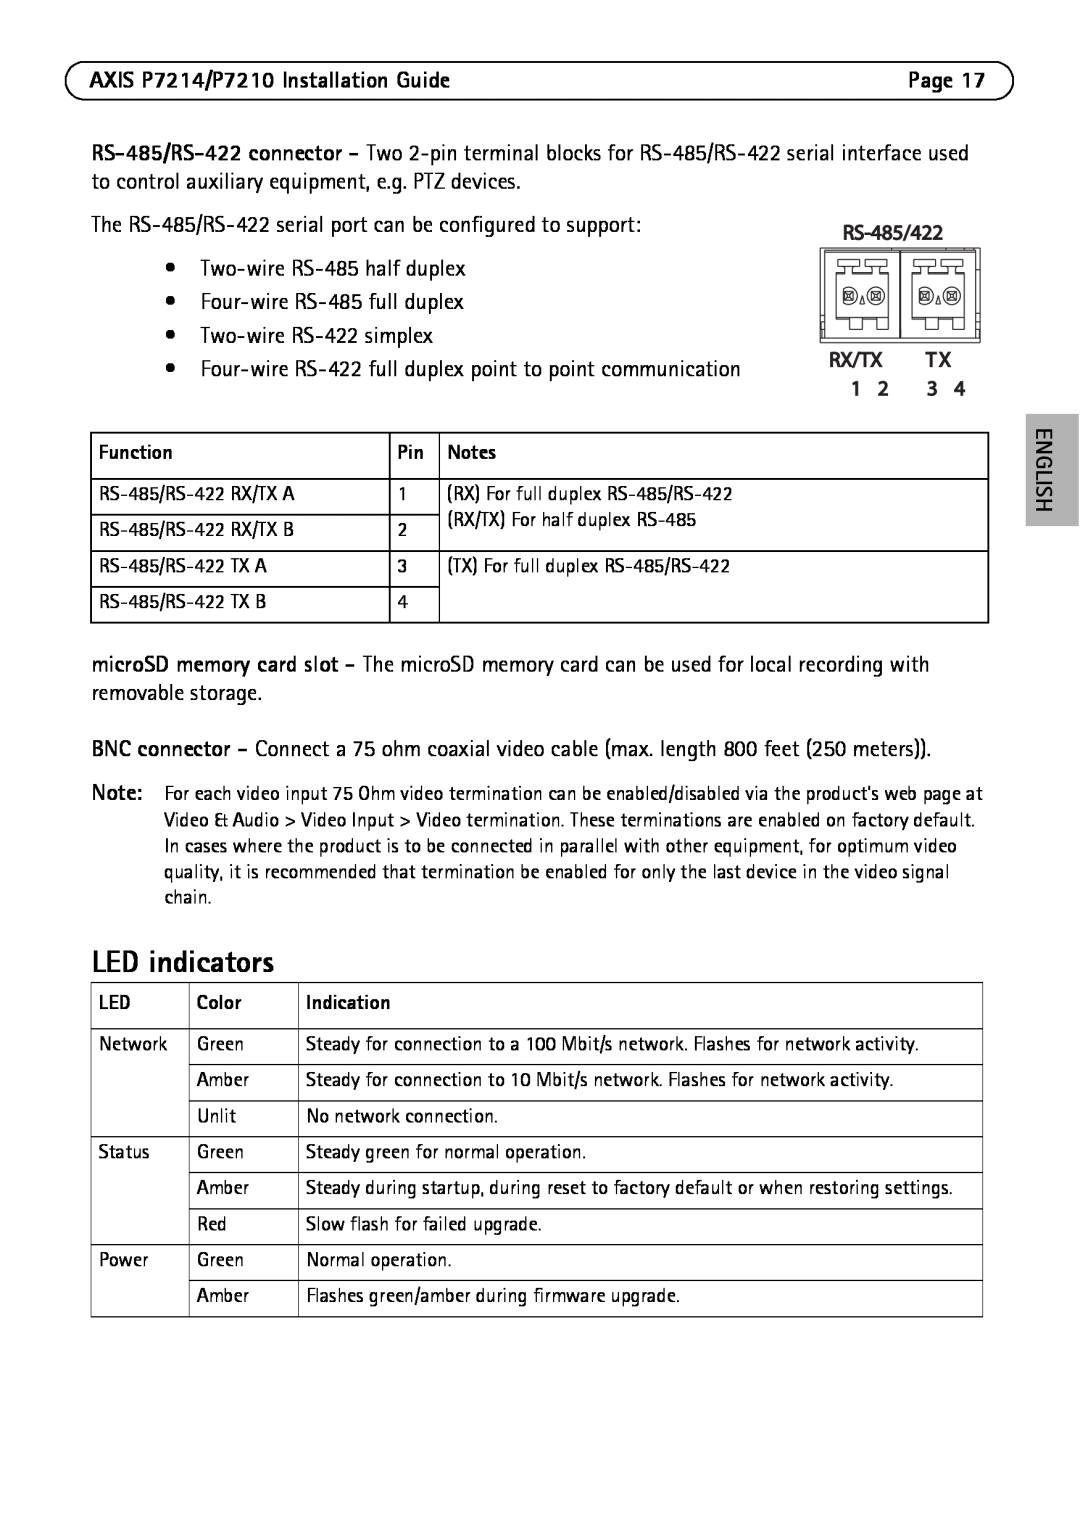 Axis Communications manual LED indicators, AXIS P7214/P7210 Installation Guide 